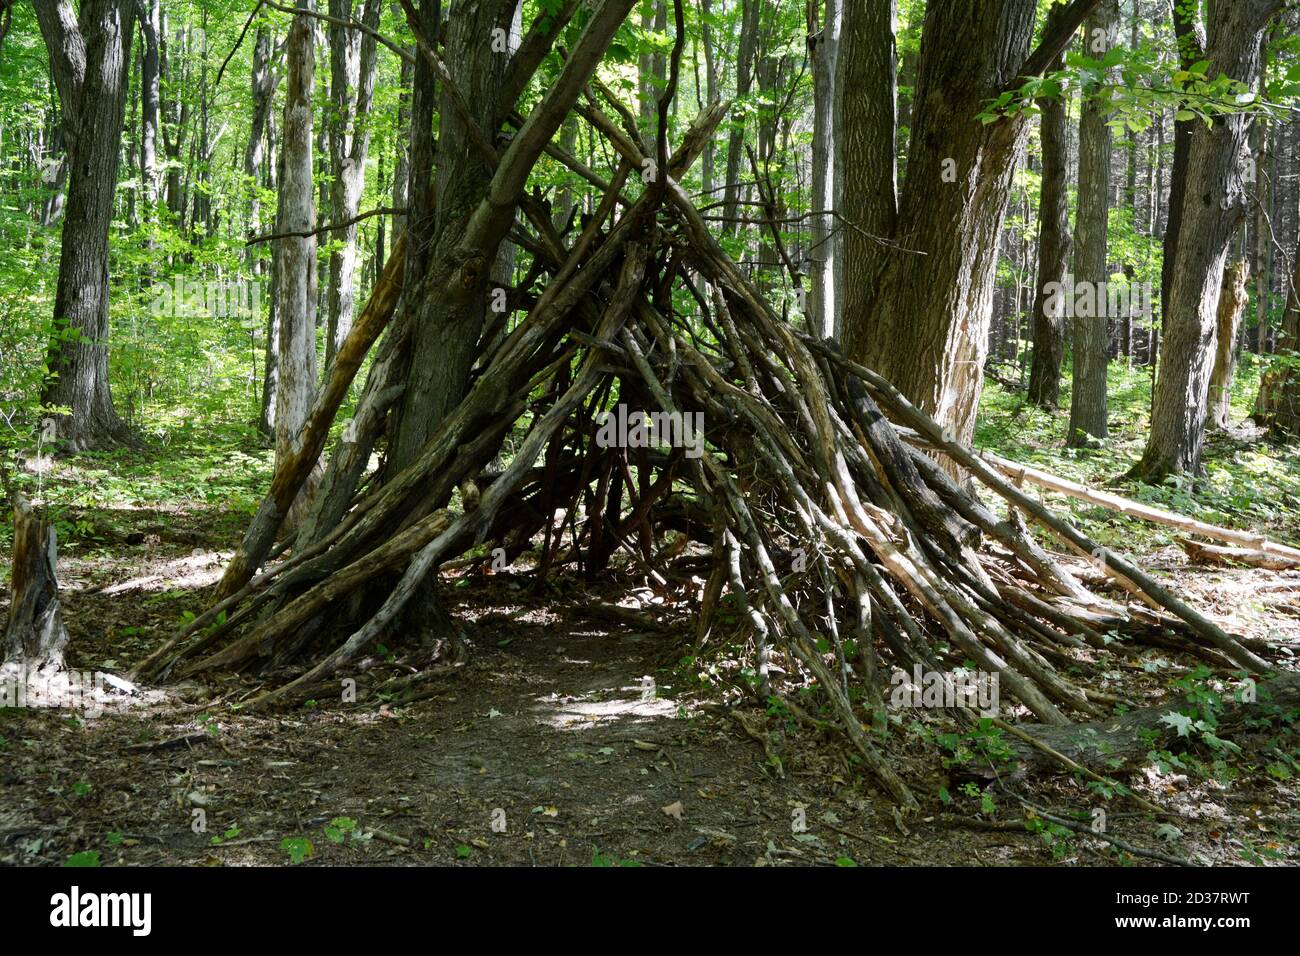 A makeshift wooden teepee (or tipi) made of tree branches in the forest in Algonquin Provincial Park, Ontario, Canada. Stock Photo